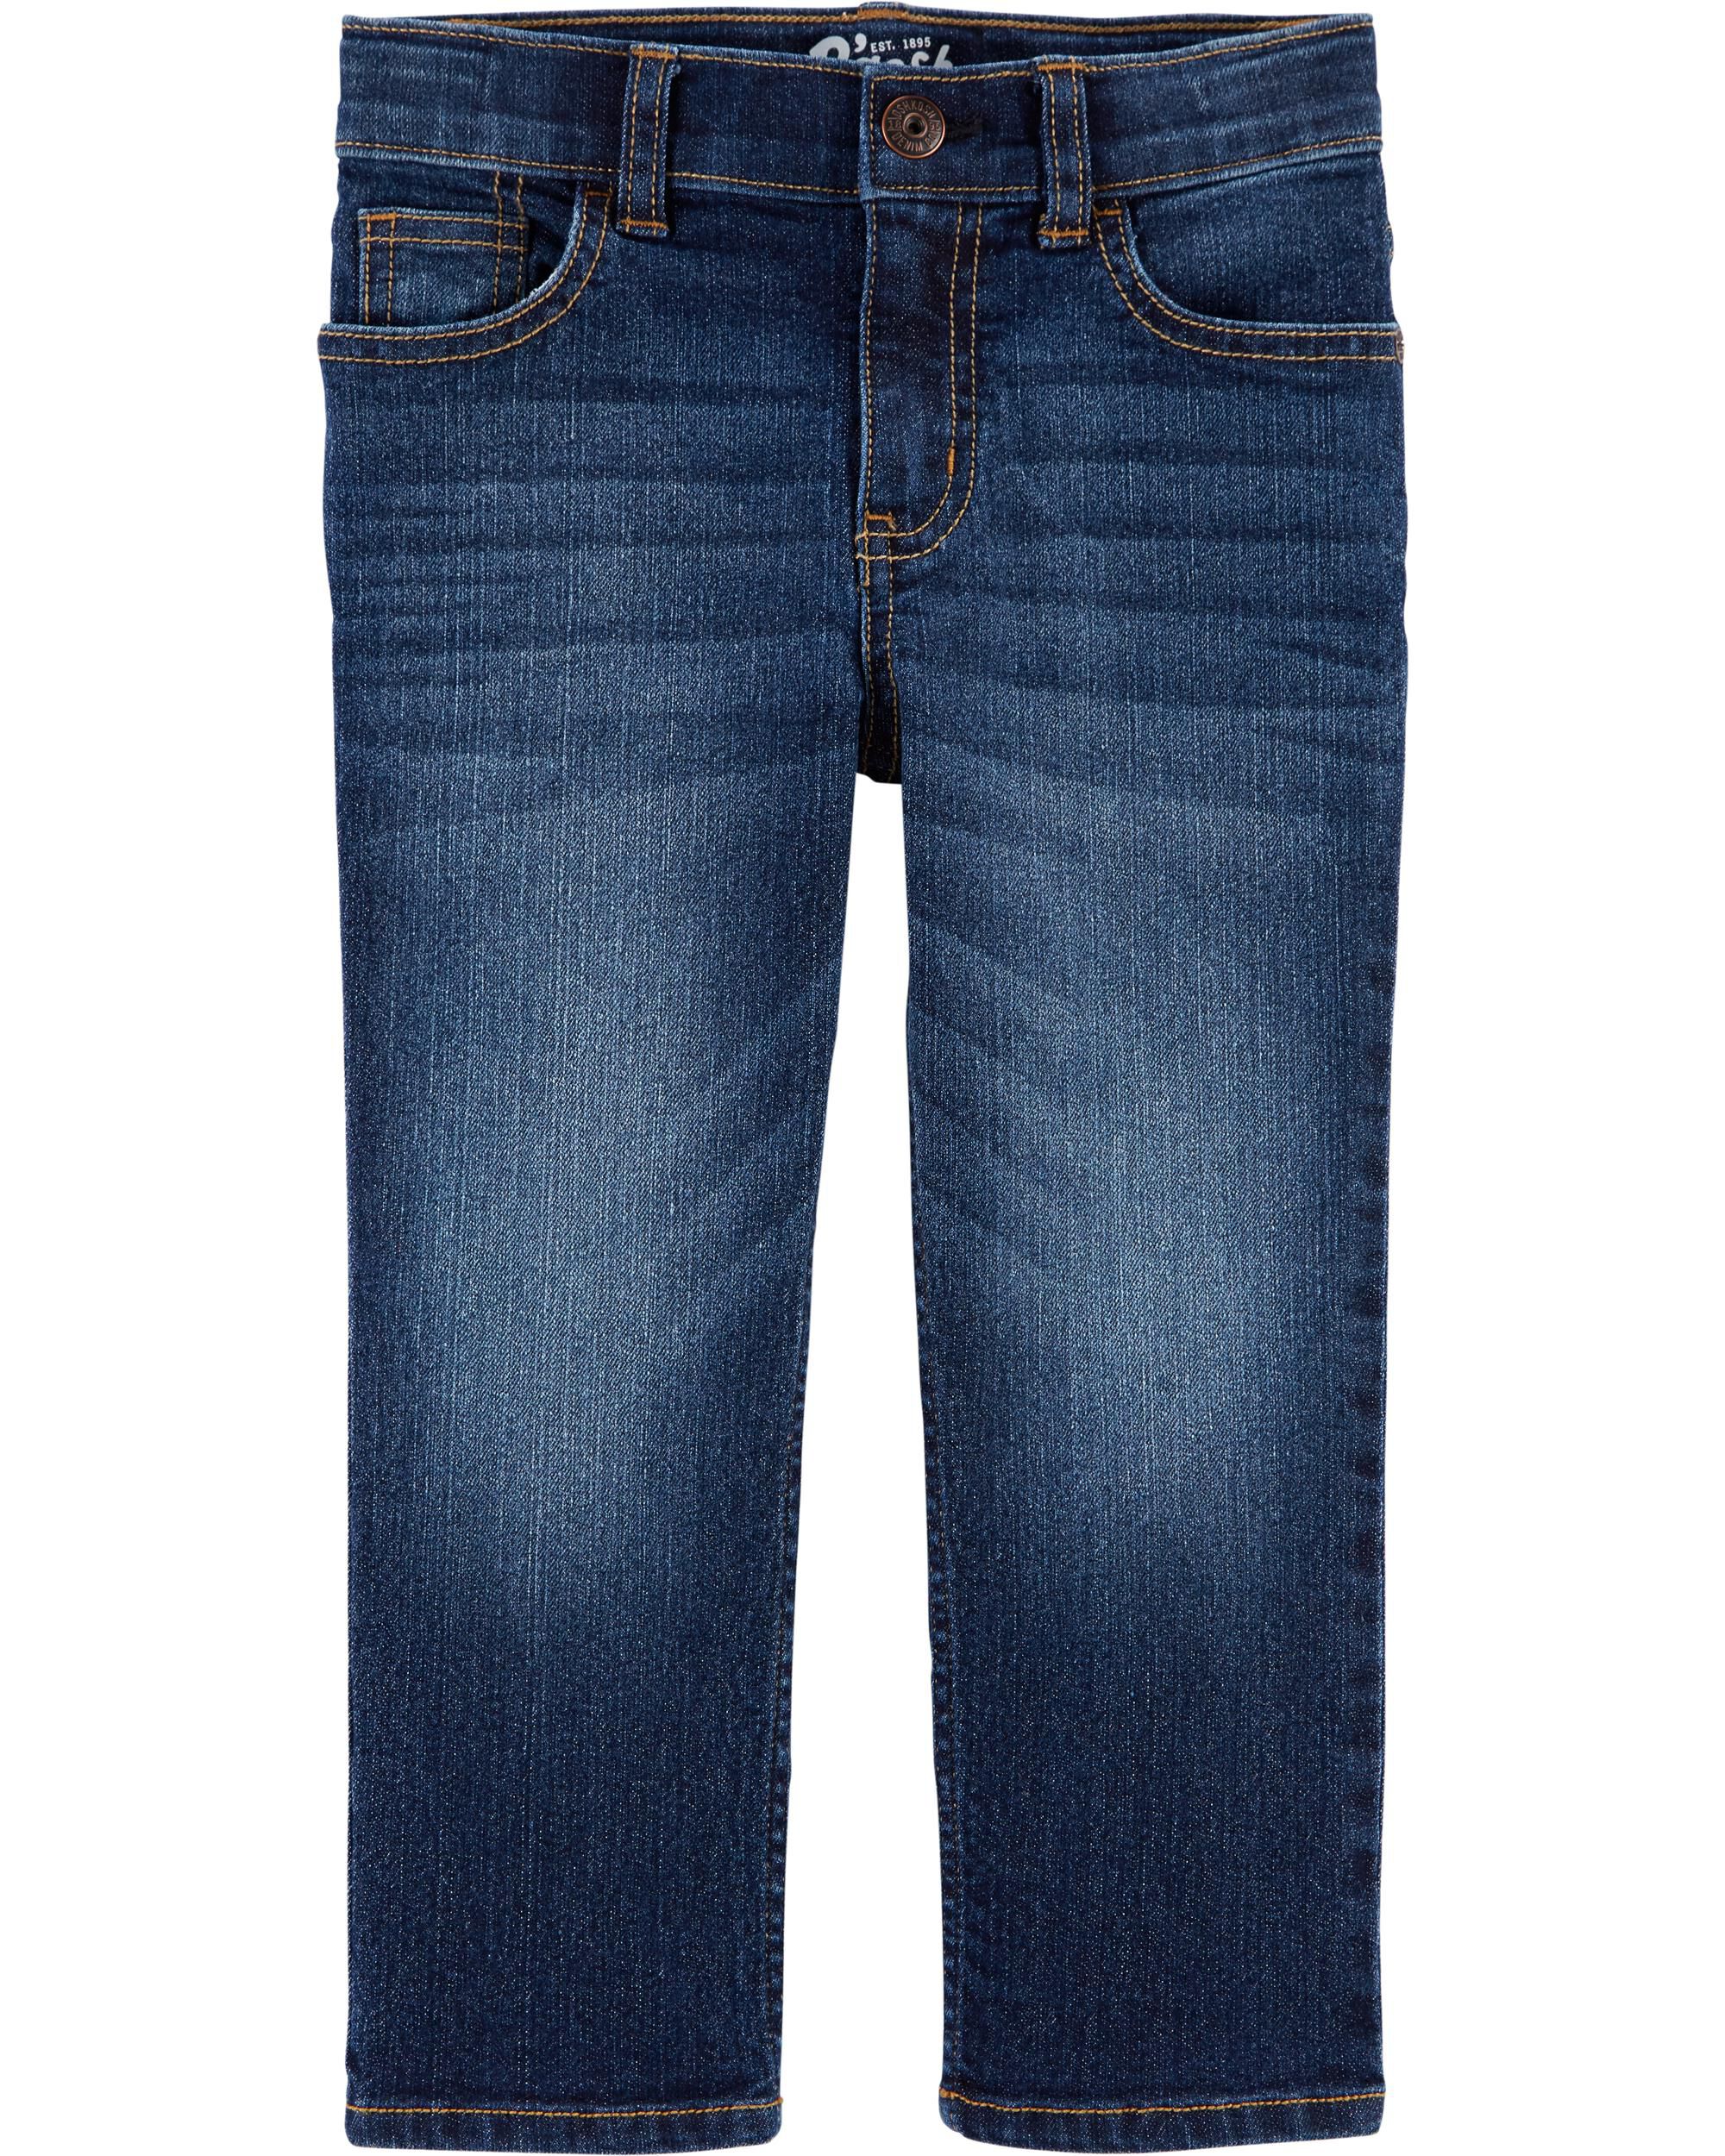 Carters Toddler Classic True Blue Wash Jeans